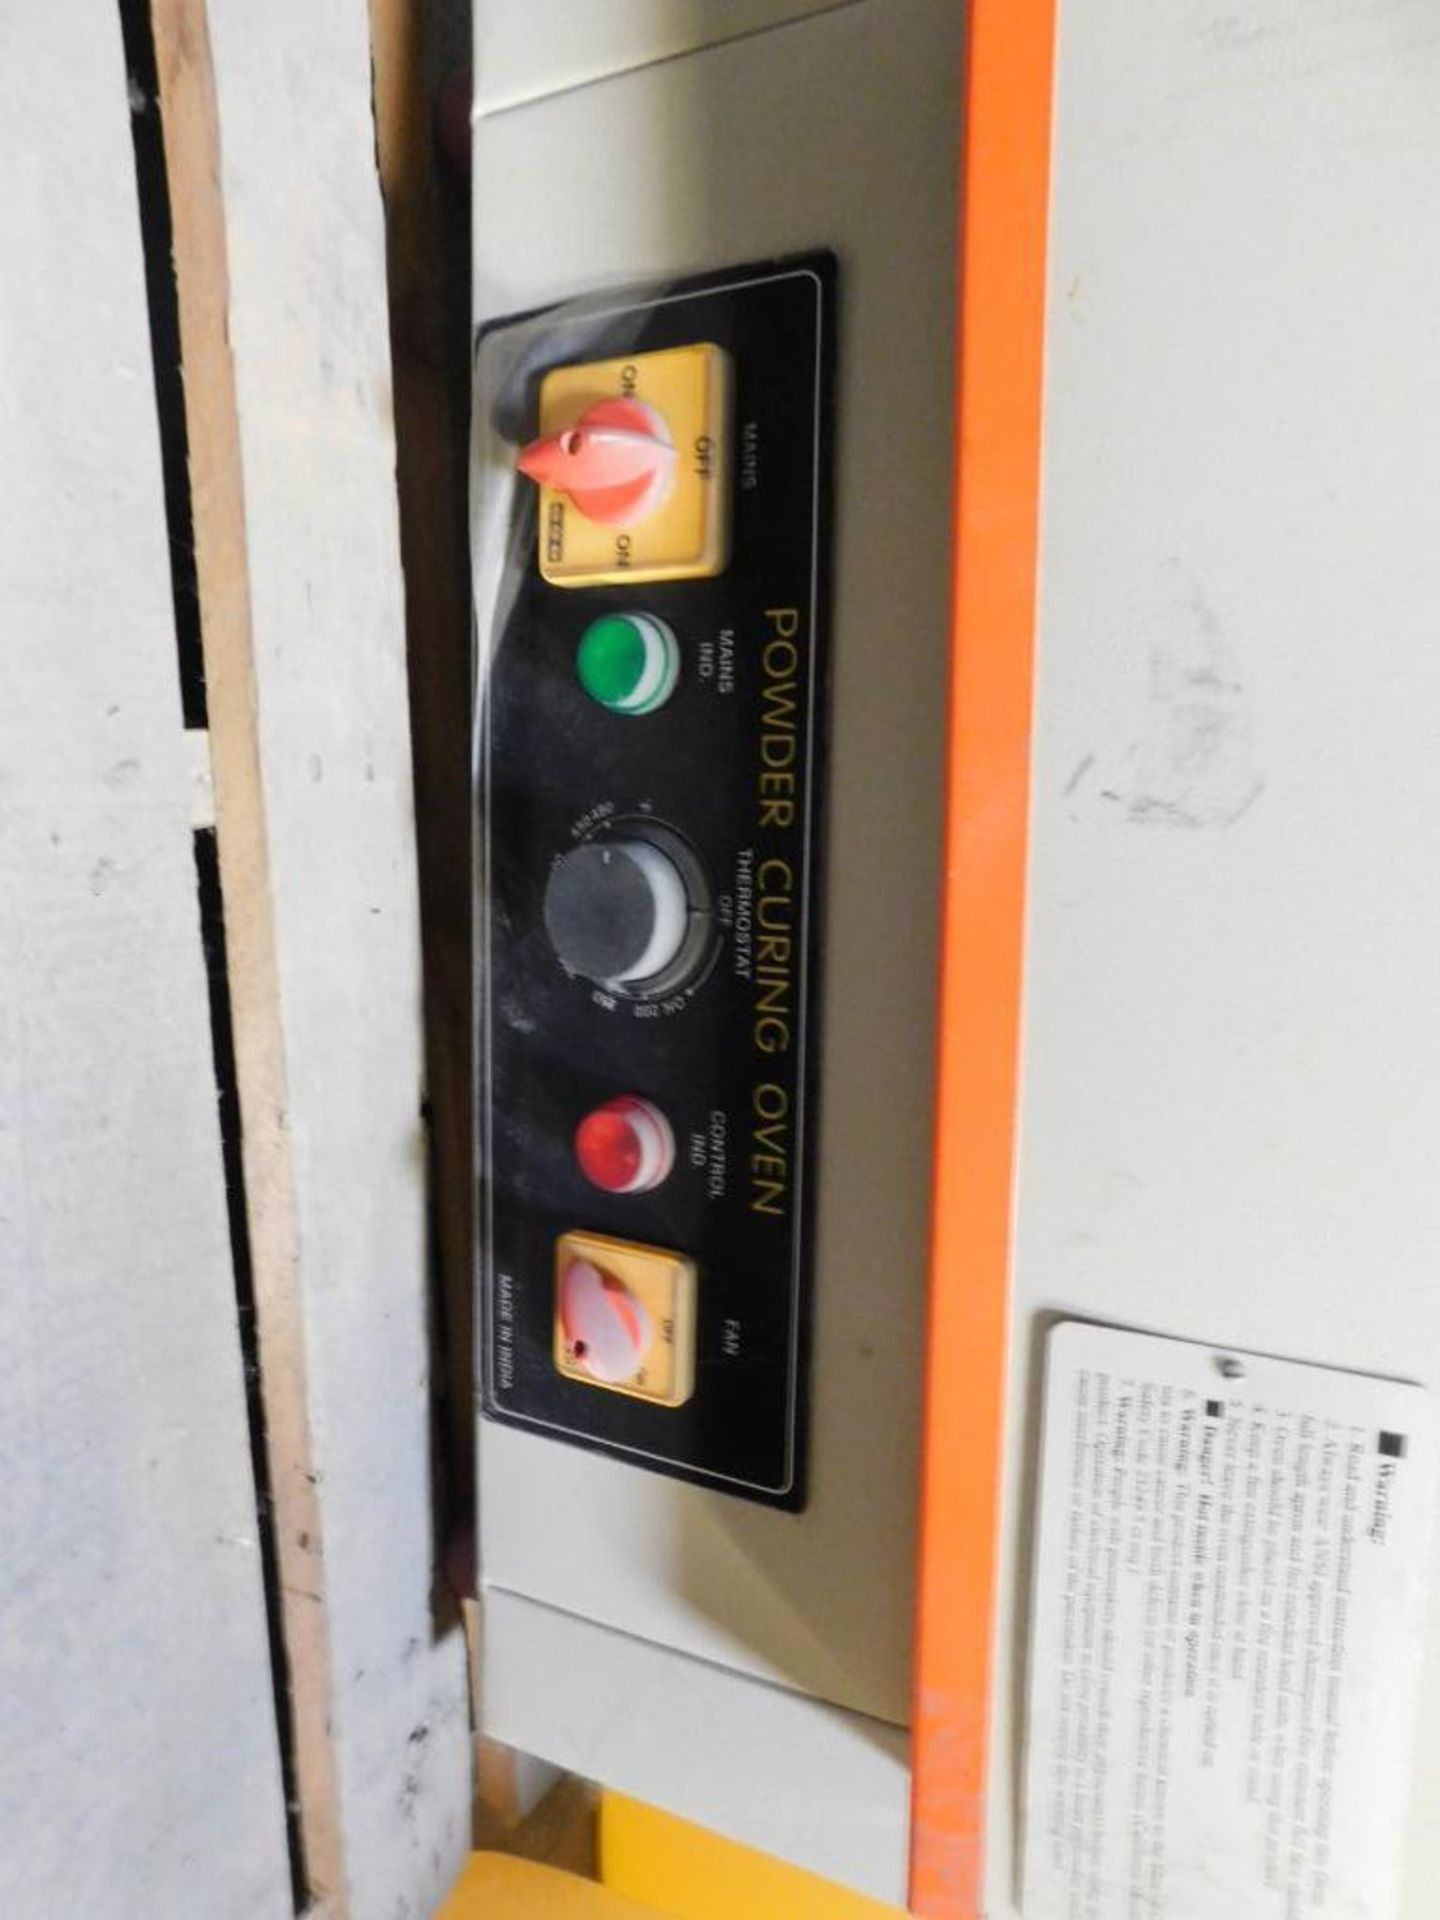 Chicago Electric Powder Curing Oven Model 46300, 110 Volt, 480 Degree F Capacity - Image 2 of 3